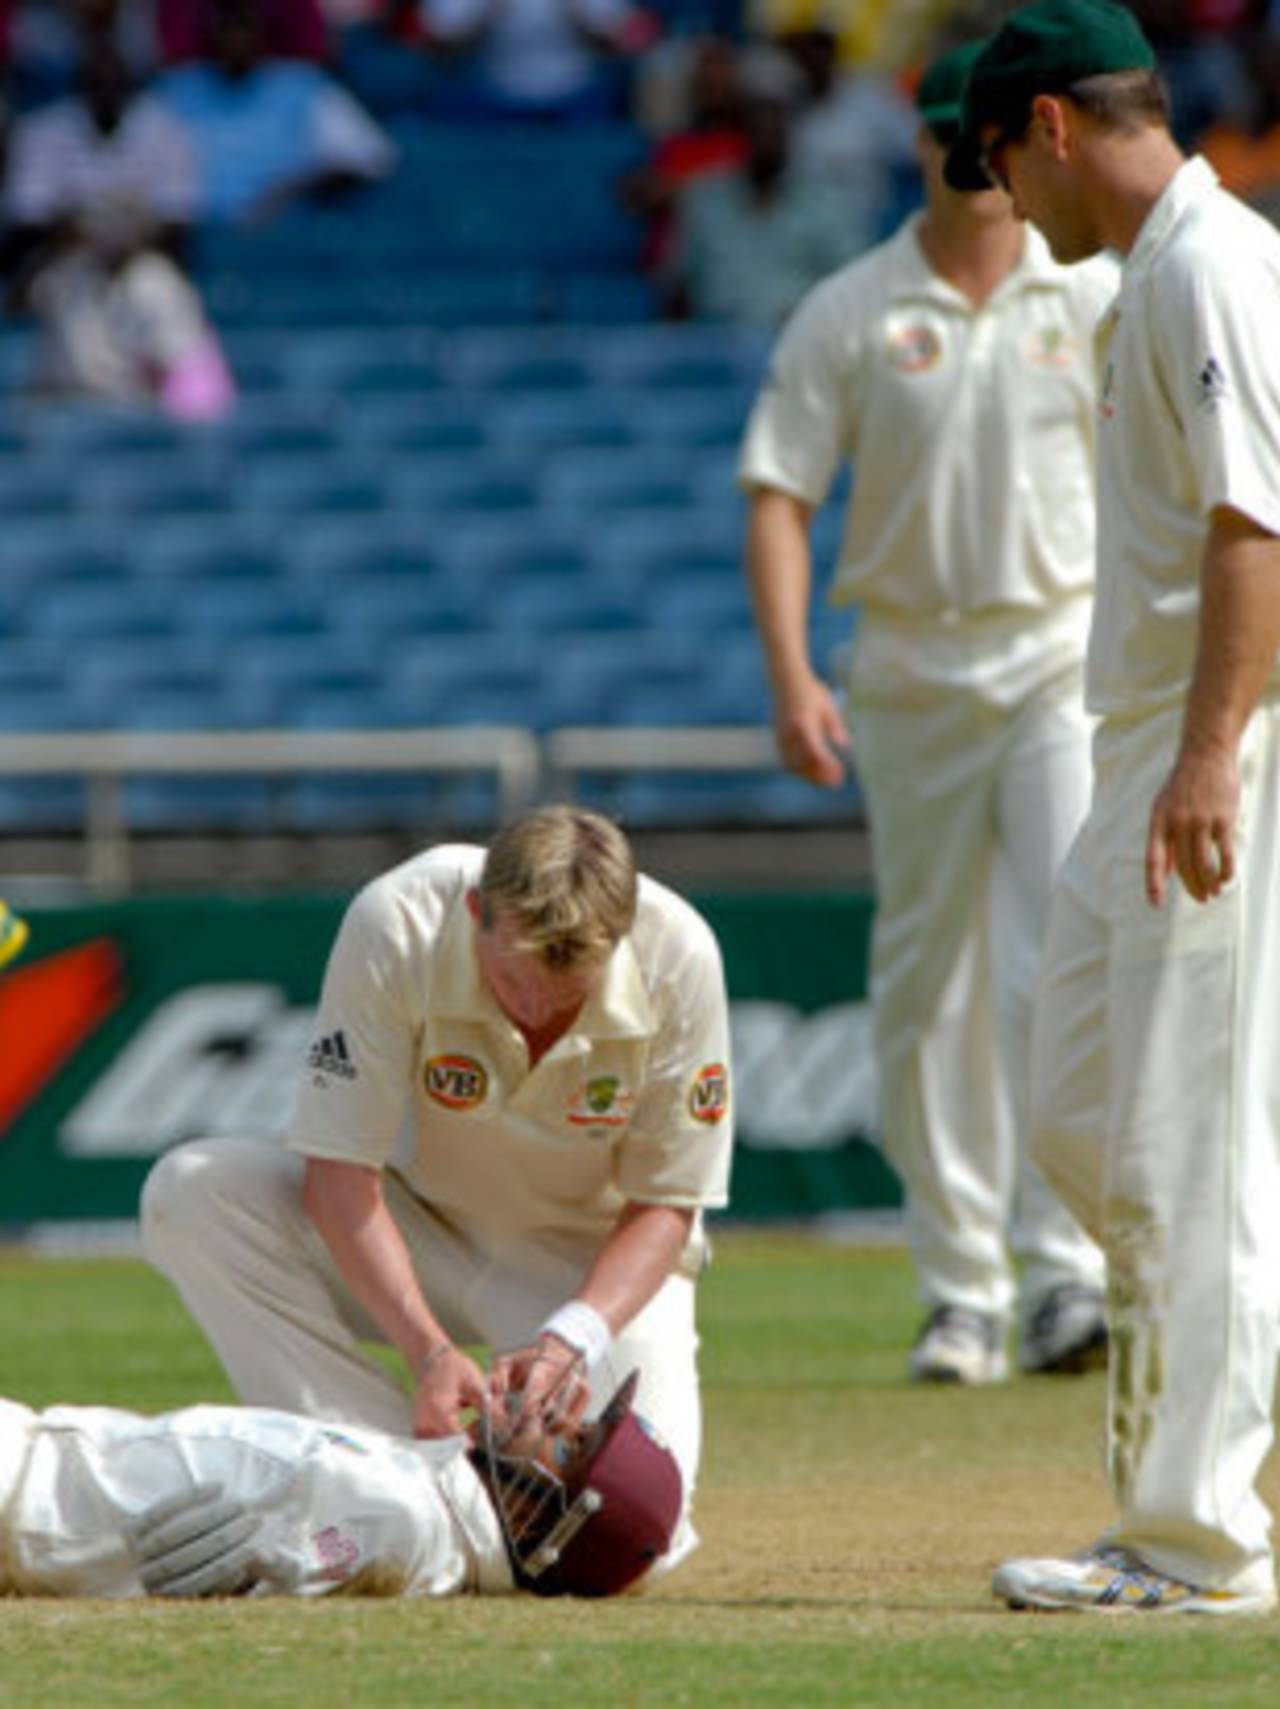 Shivnarine Chanderpaul was felled by a bouncer to the head from Brett Lee in Jamaica in 2008 but kept batting and went on to score a century&nbsp;&nbsp;&bull;&nbsp;&nbsp;DigicelCricket.com